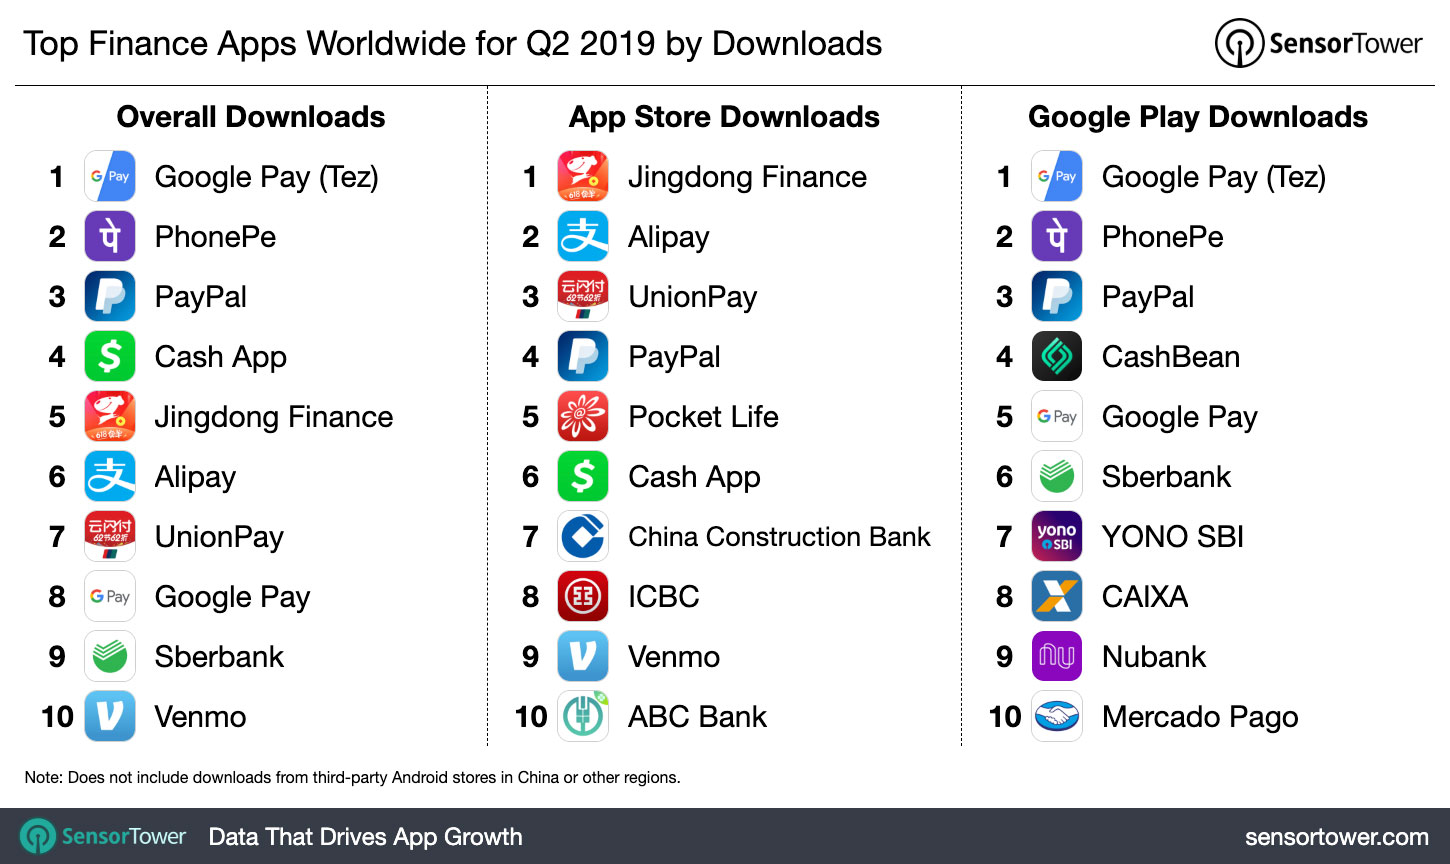 Top Finance Apps Worldwide for Q2 2019 by Downloads